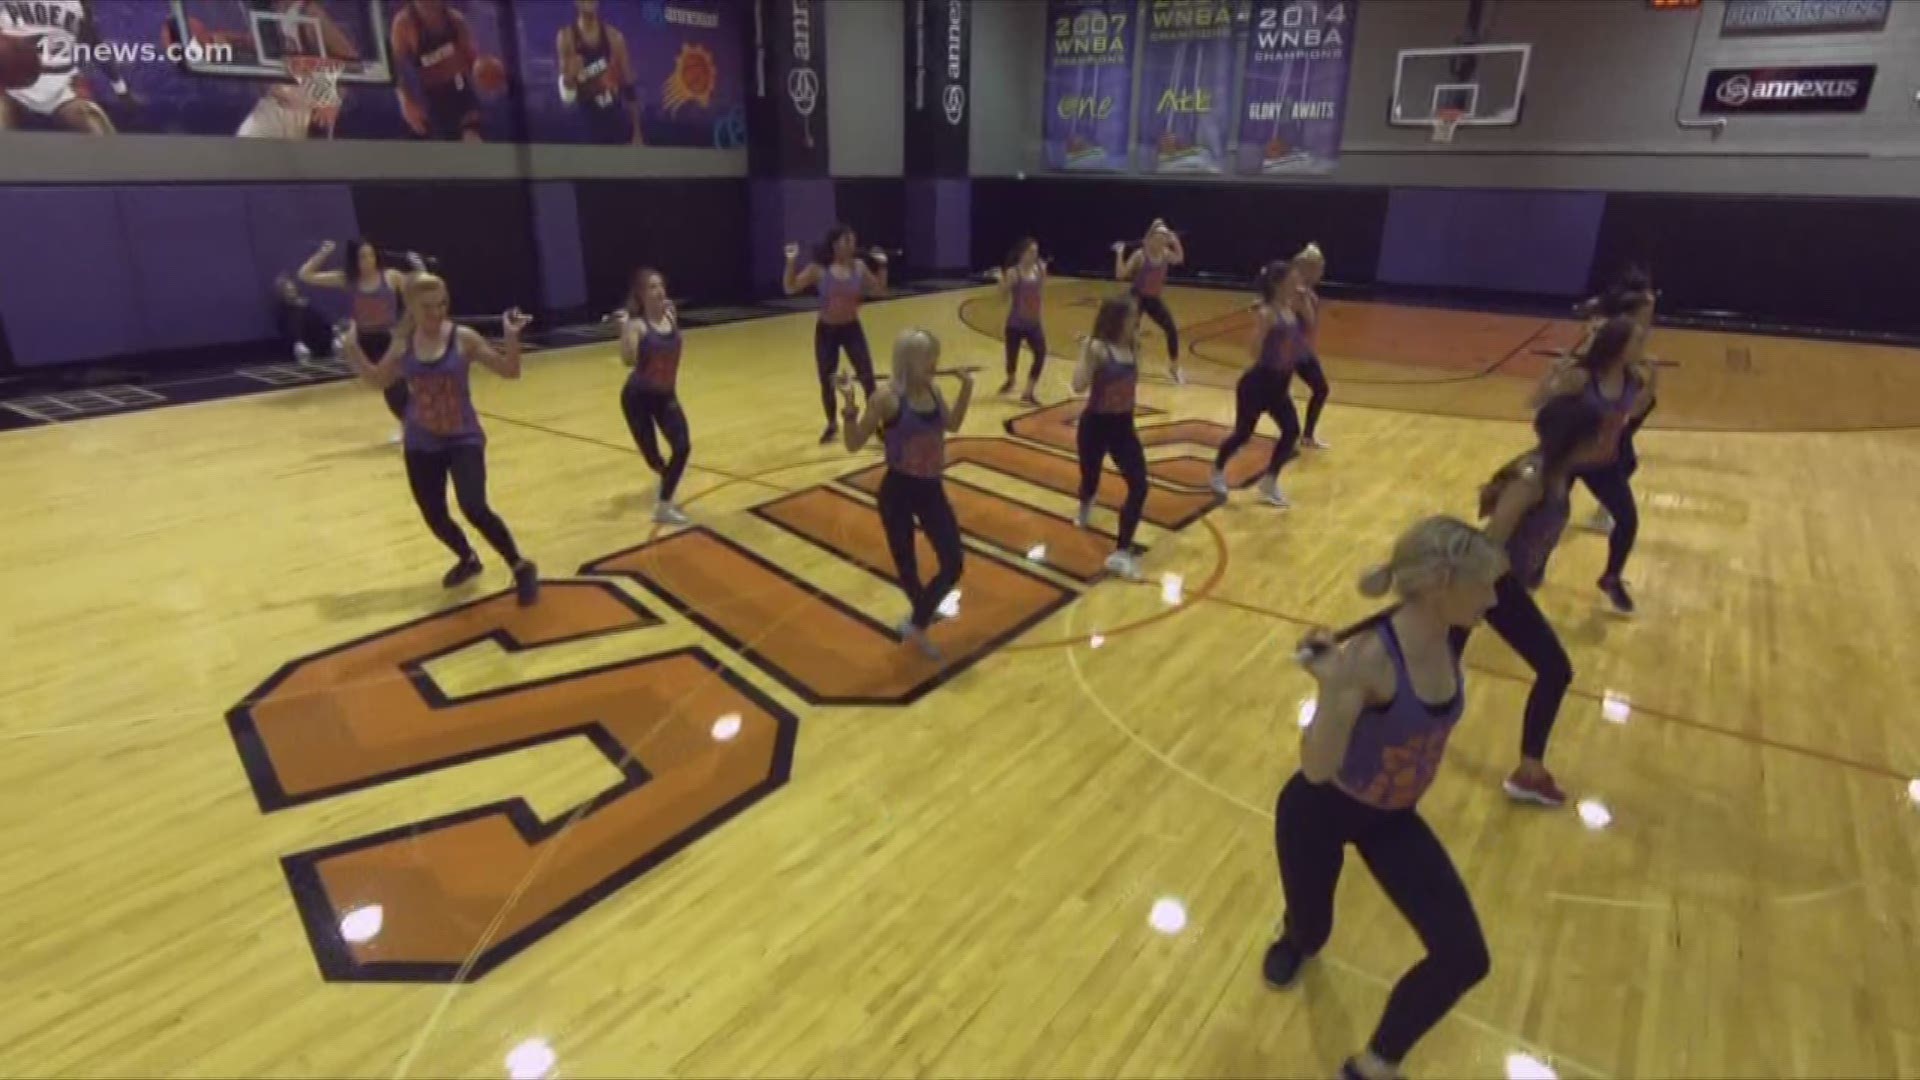 They learn a new dance routine every practice, practice multiple times a week and fire up the fans at every Suns game! Think Team 12's Krystle Henderson can keep up?